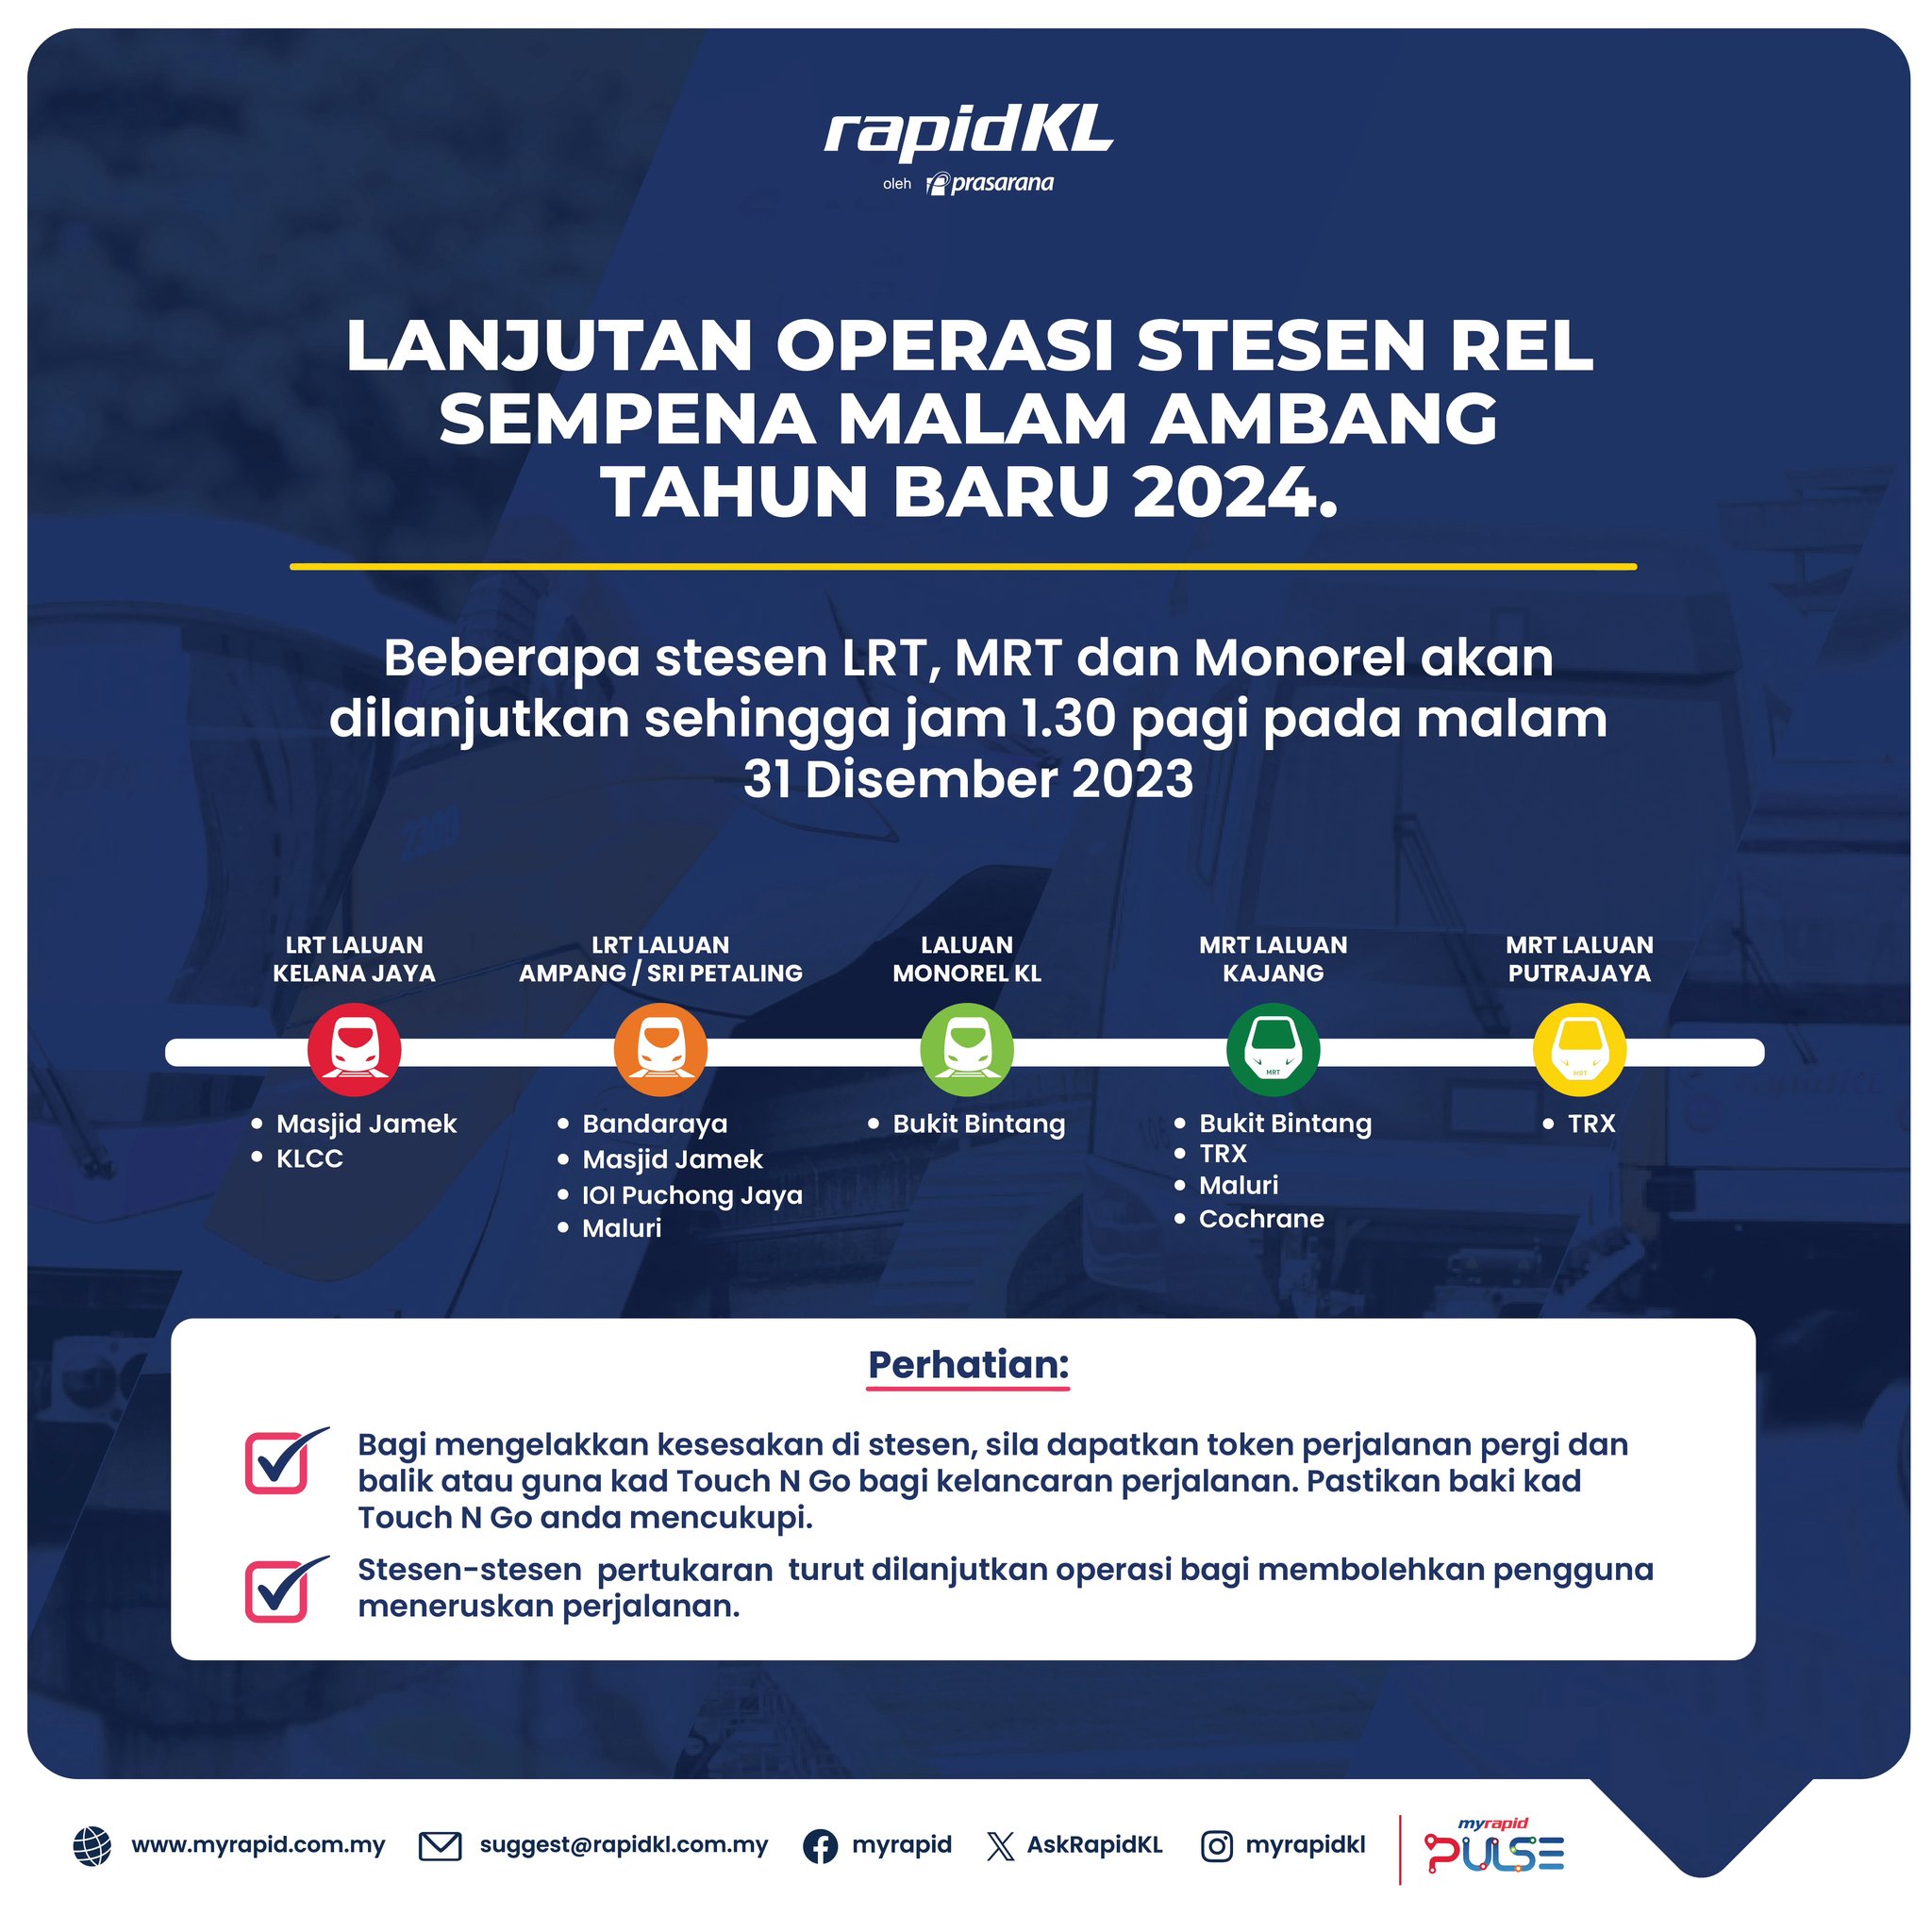 Rapidkl extends working hours for selected train stations